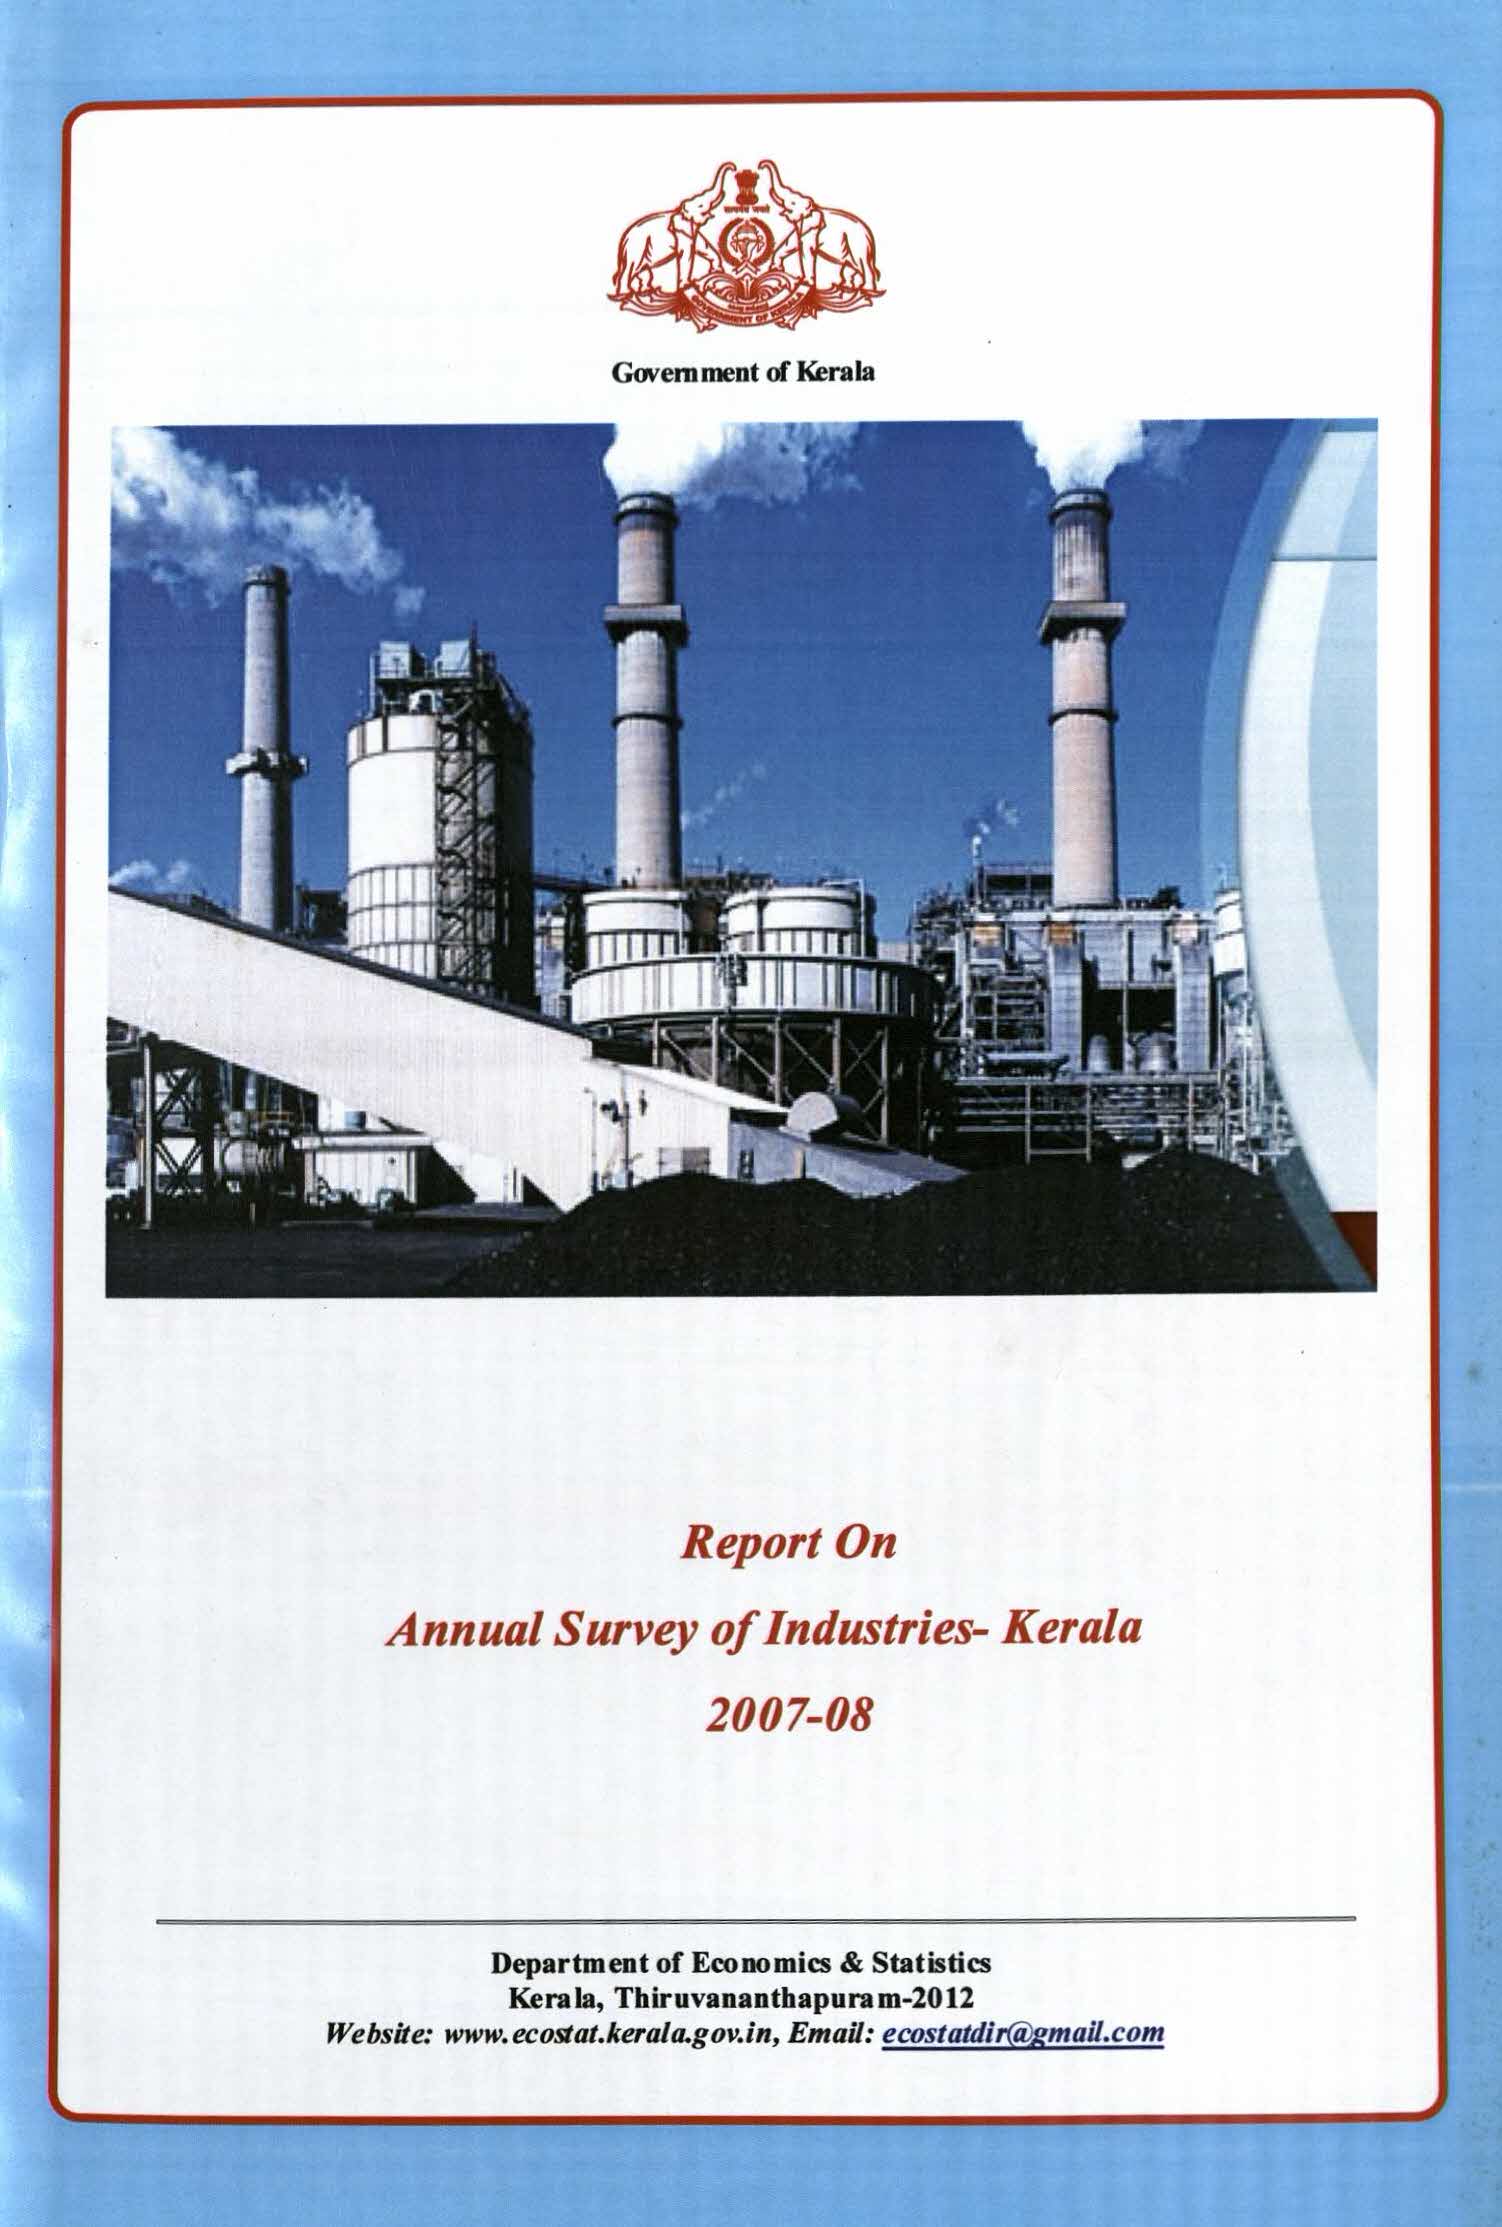 Annual Survey of Industries 2007-08